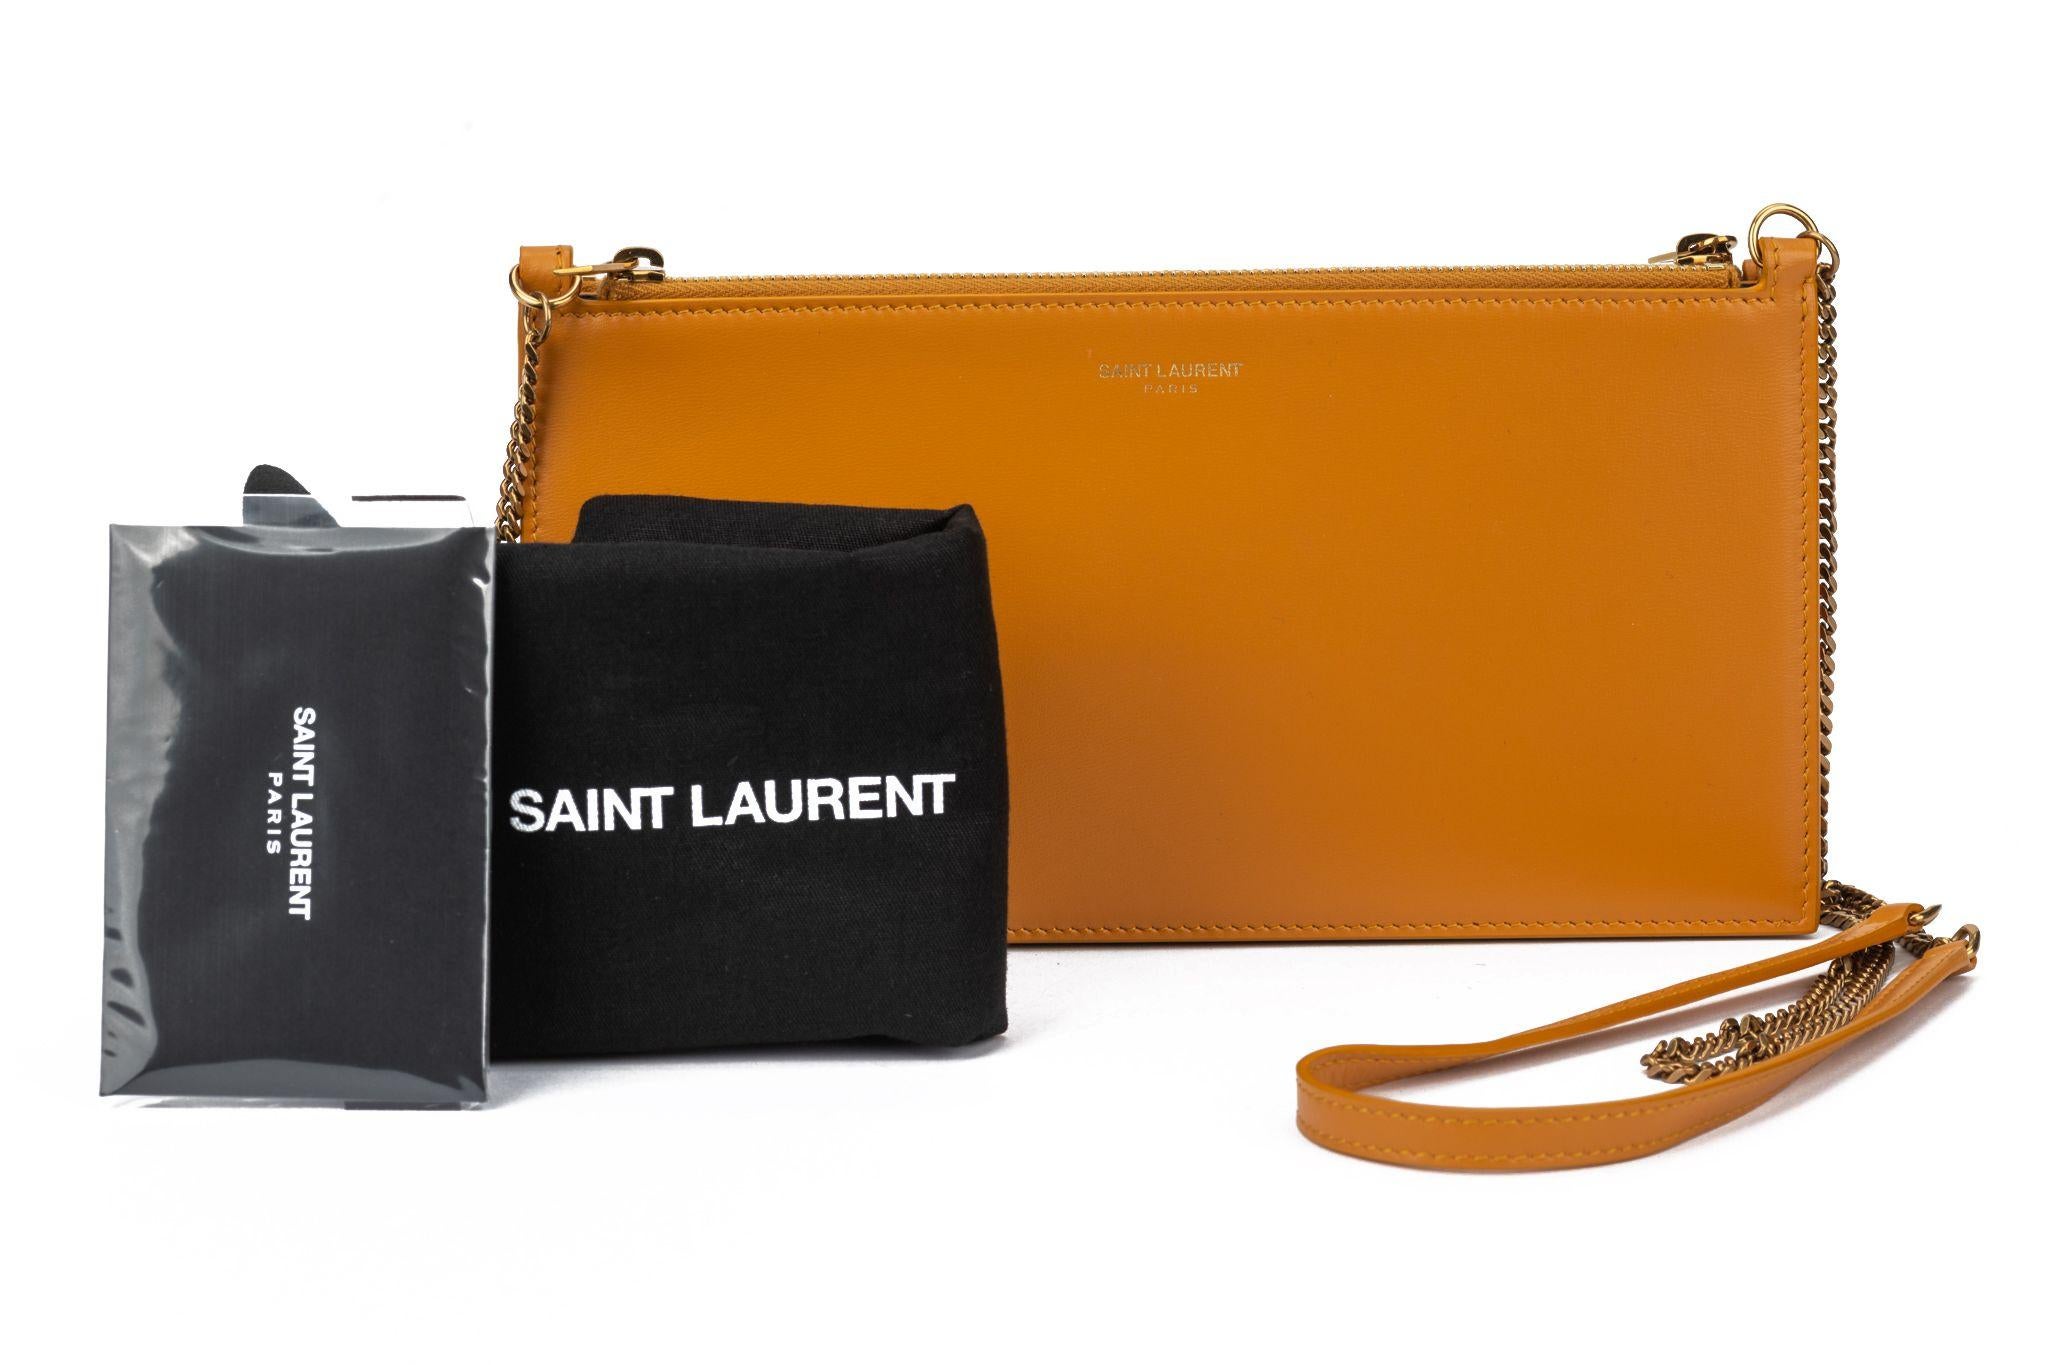 Yves Saint Laurent Leather Double Pouch on Chain Cross body Bag in dark yellow. The bag is crafted out of durable calfskin leather with a removable chain strap with leather shoulder pad. Shoulder drop 22”.  The bag is new and comes with the original